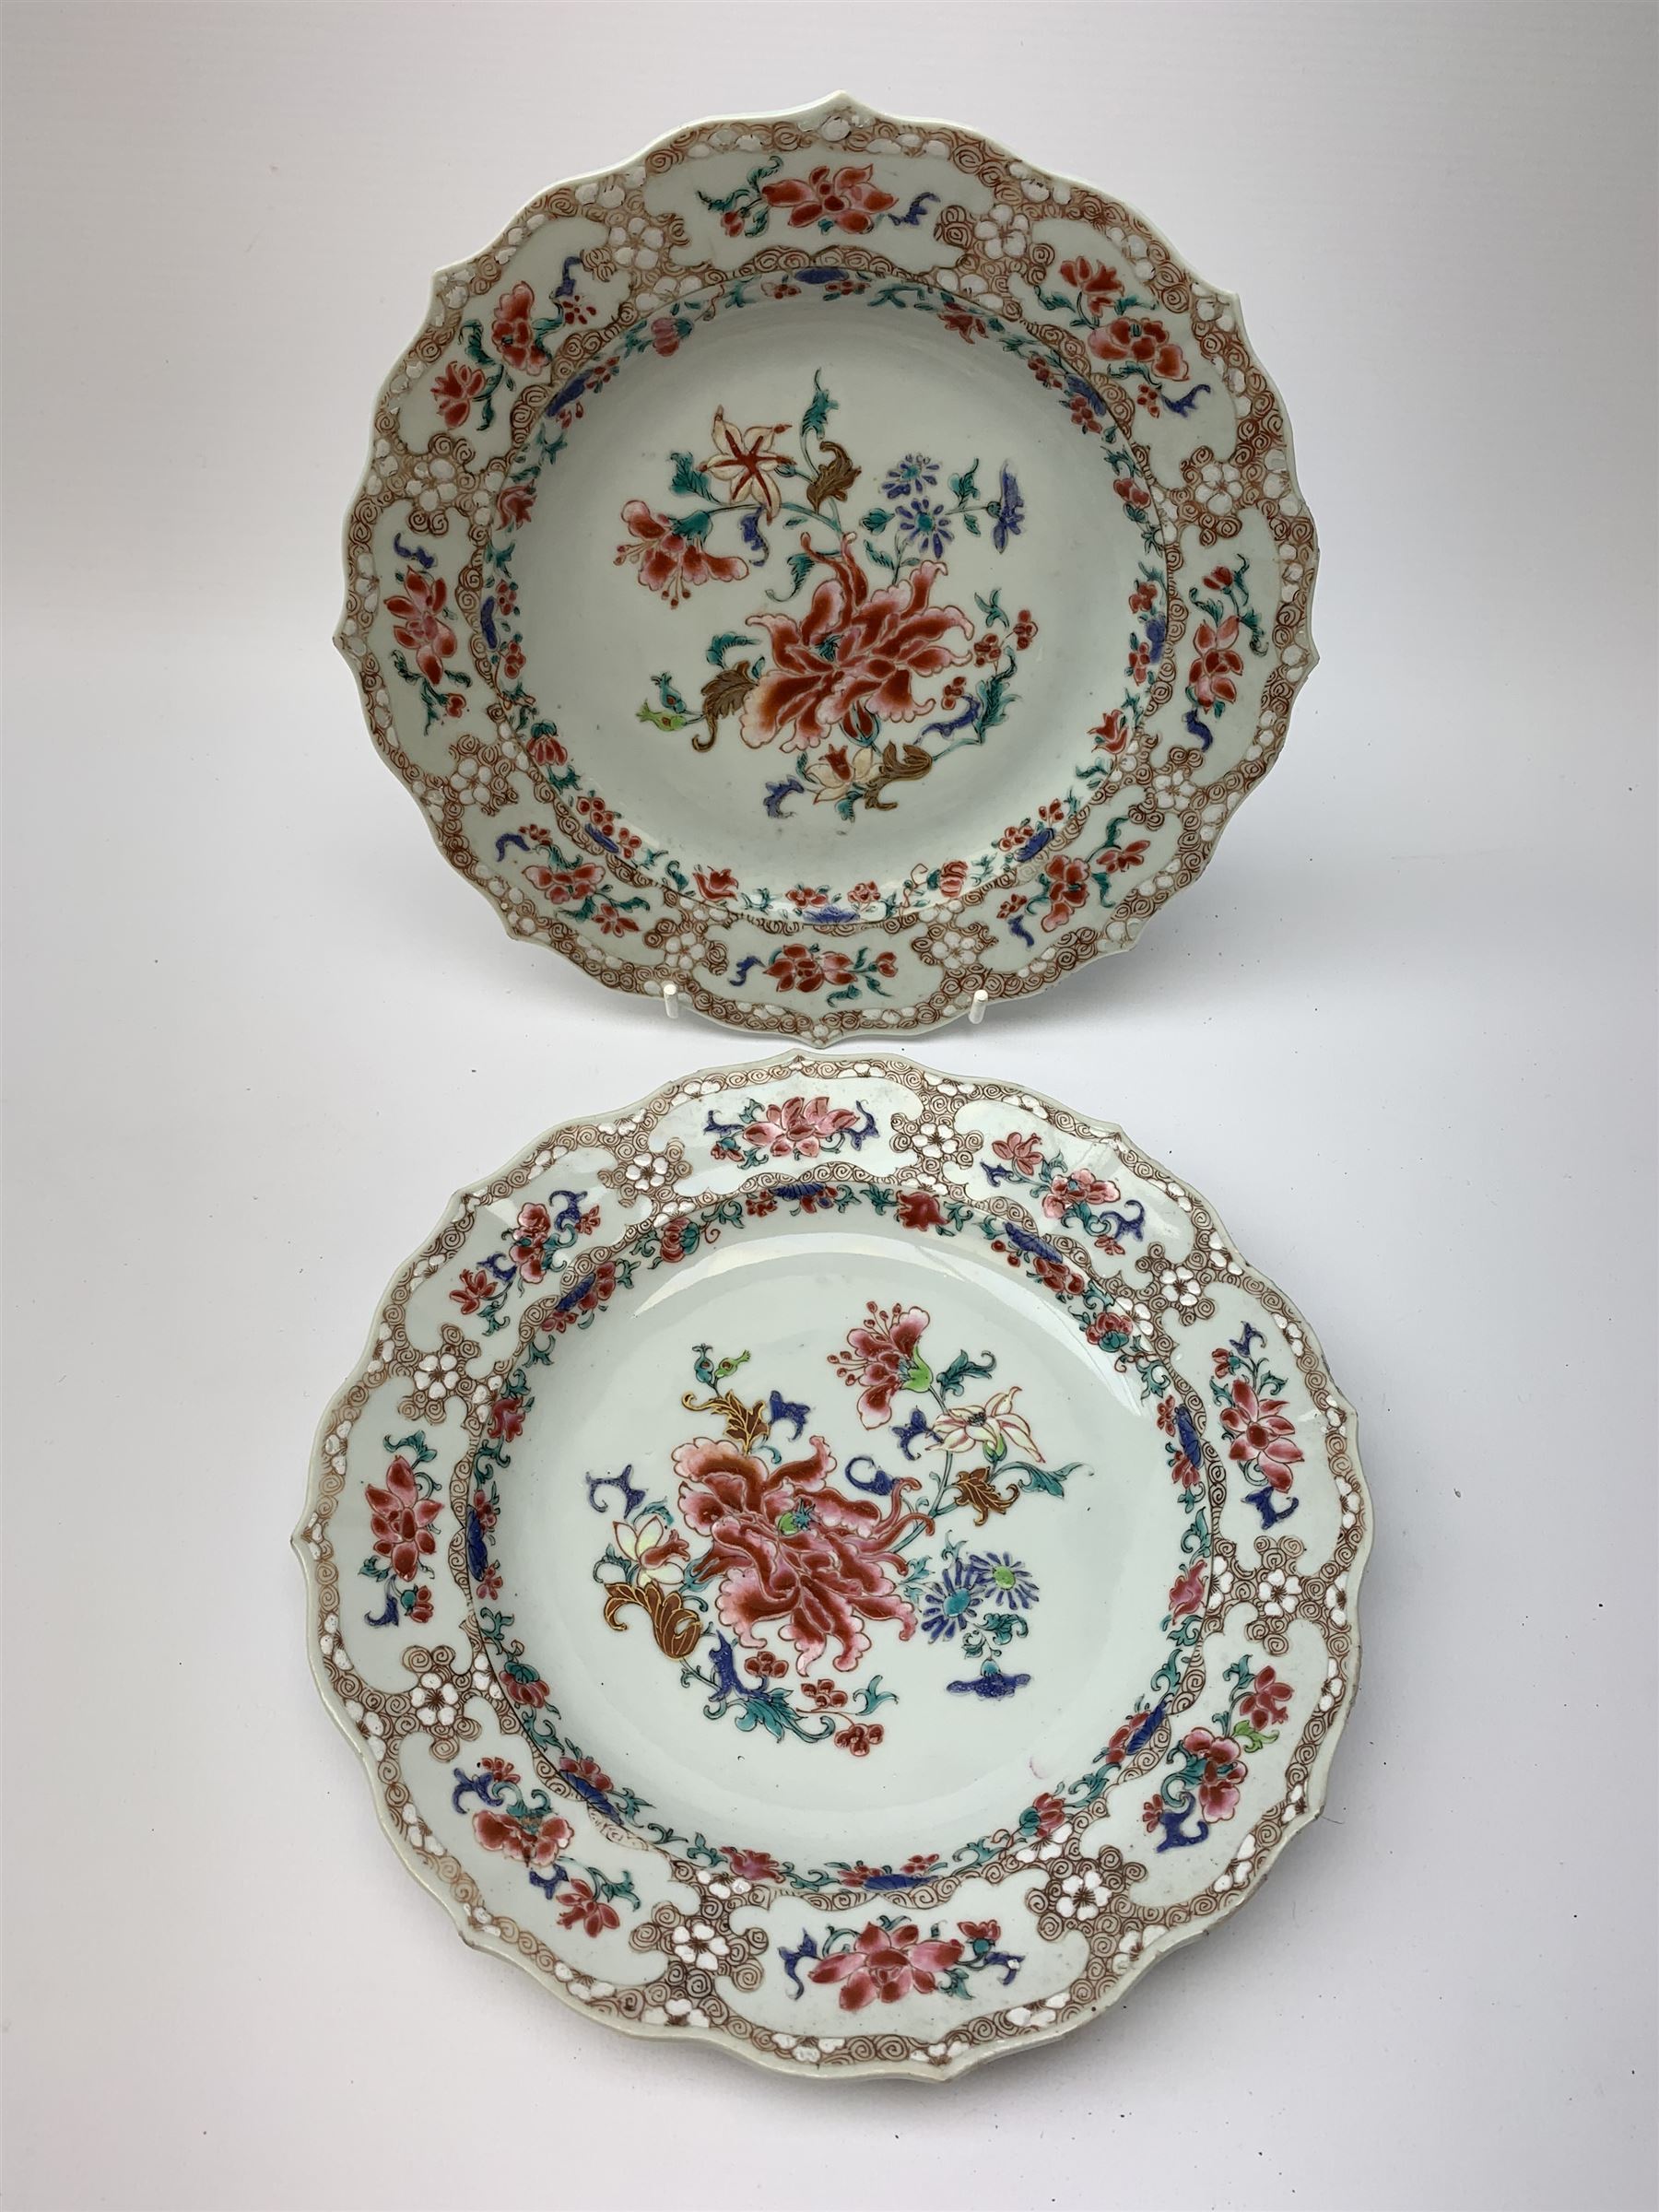 Pair of 19th century Chinese famille rose plates - Image 4 of 5